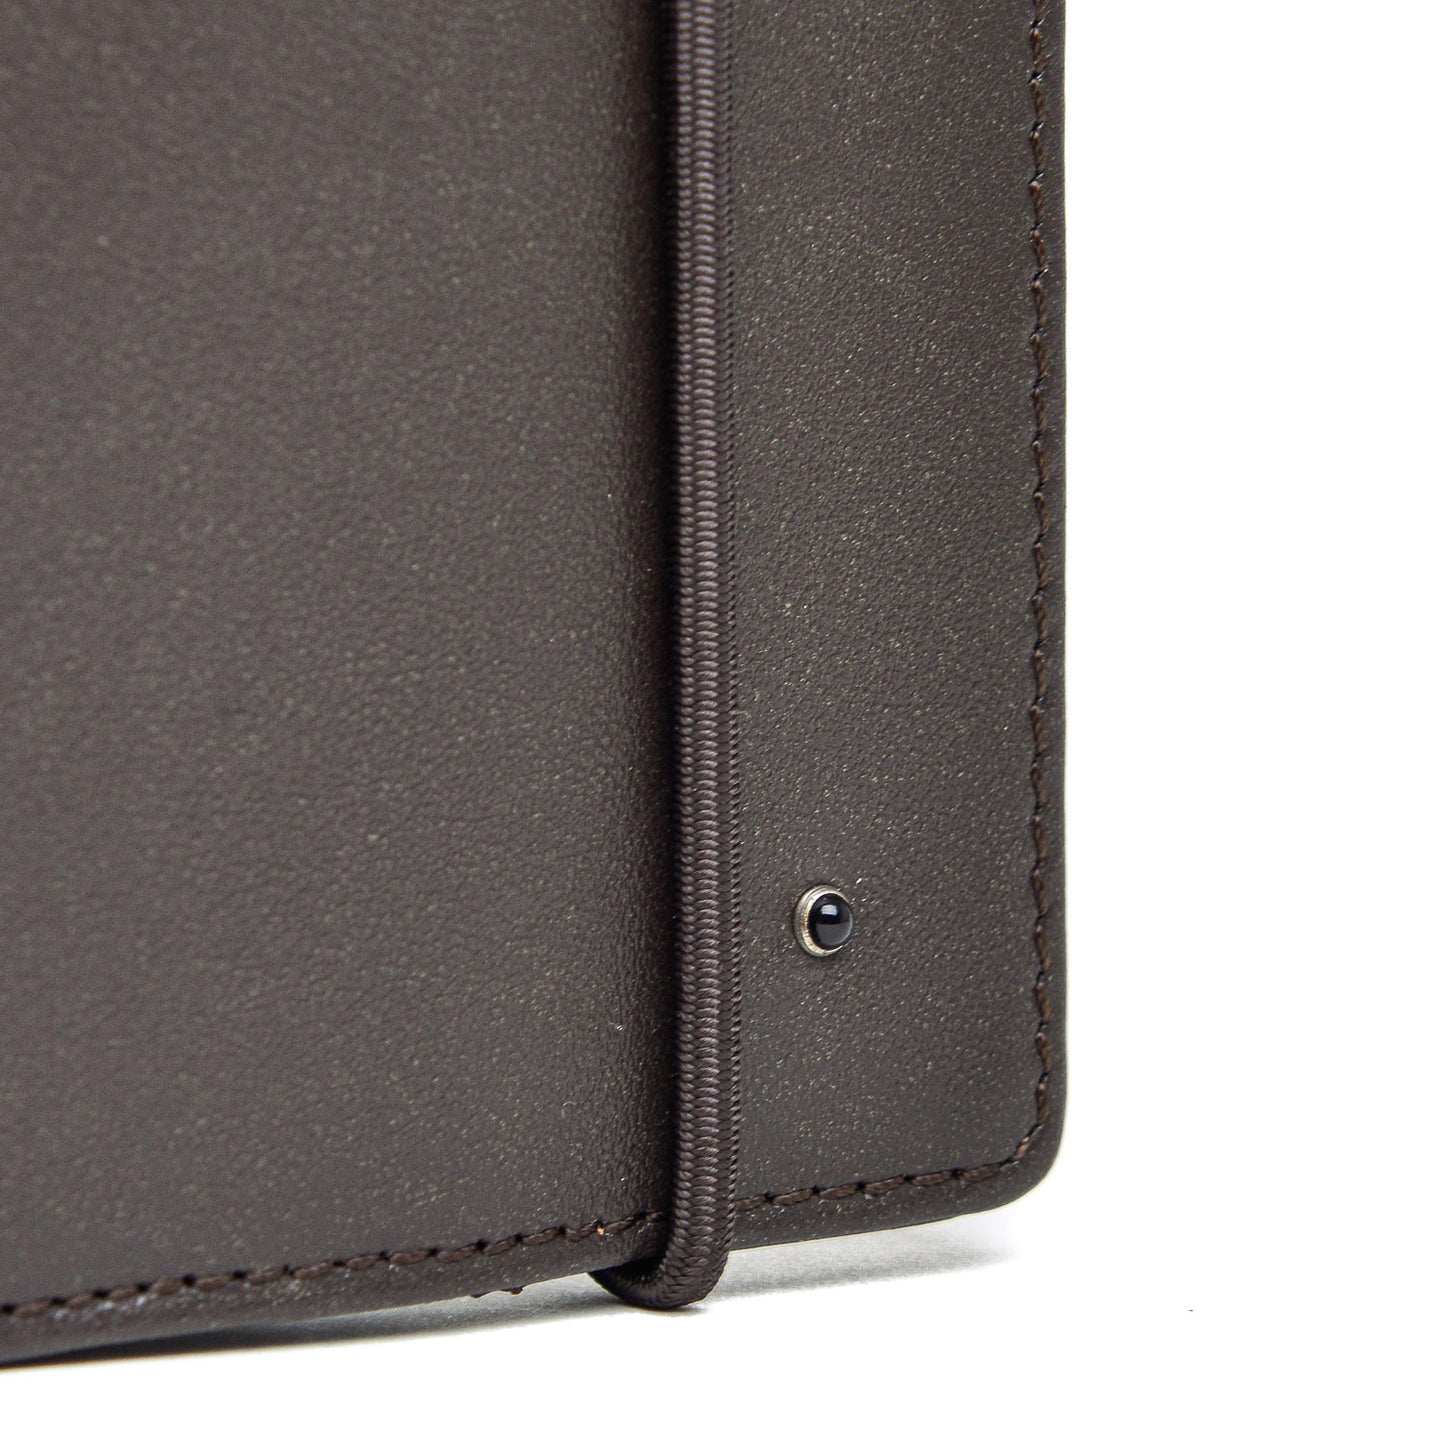 Classic Leather Dark Leather Folding Wallet